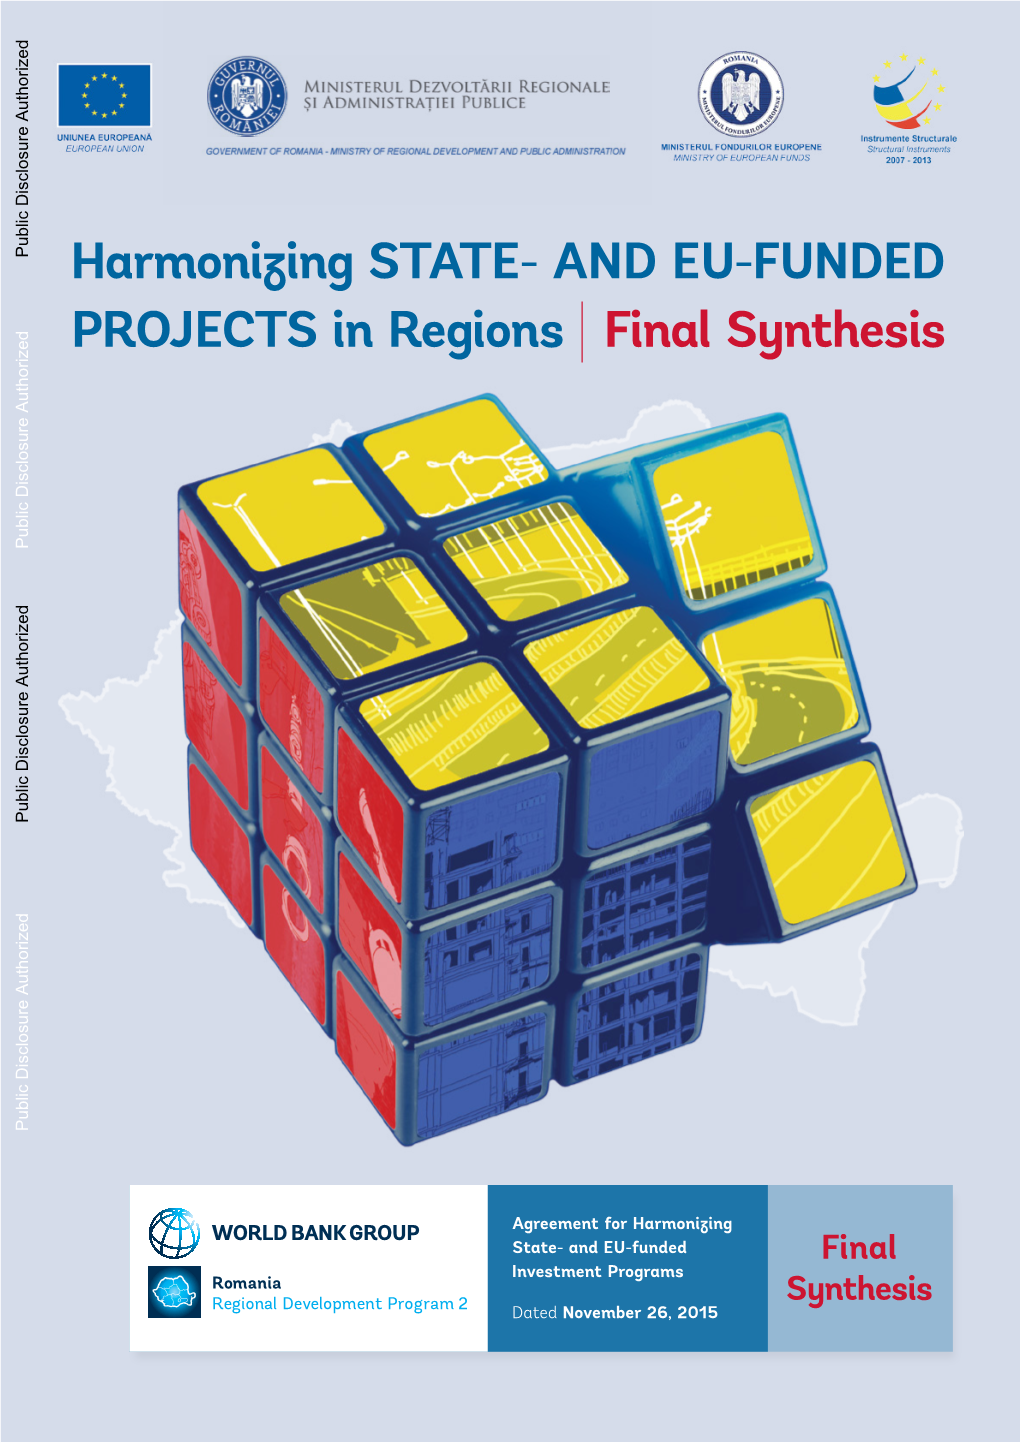 Harmonizing State- and EU-Funded Projects in Regions | Final Synthesis Public Disclosure Authorized Public Disclosure Authorized Public Disclosure Authorized